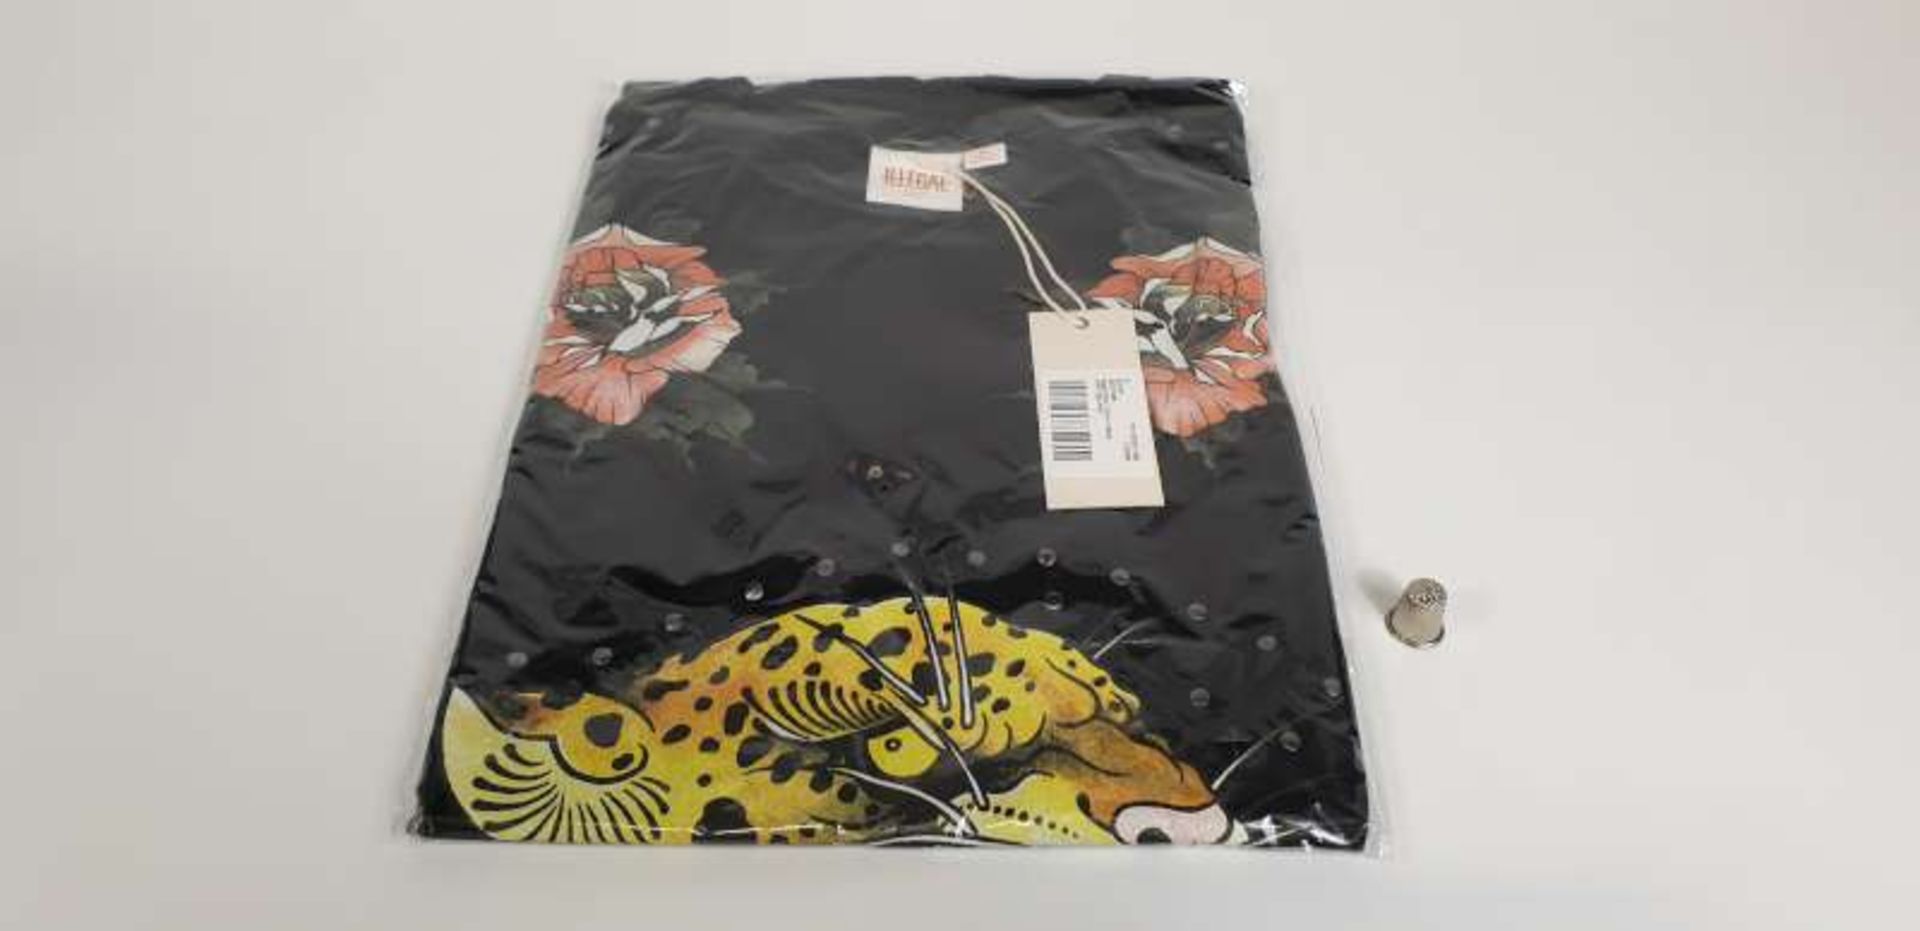 10 X BRAND NEW ILLEGAL CLUB PARIS T SHIRTS WITH TIGER PRINT DETAIL IN VARIOUS SIZES